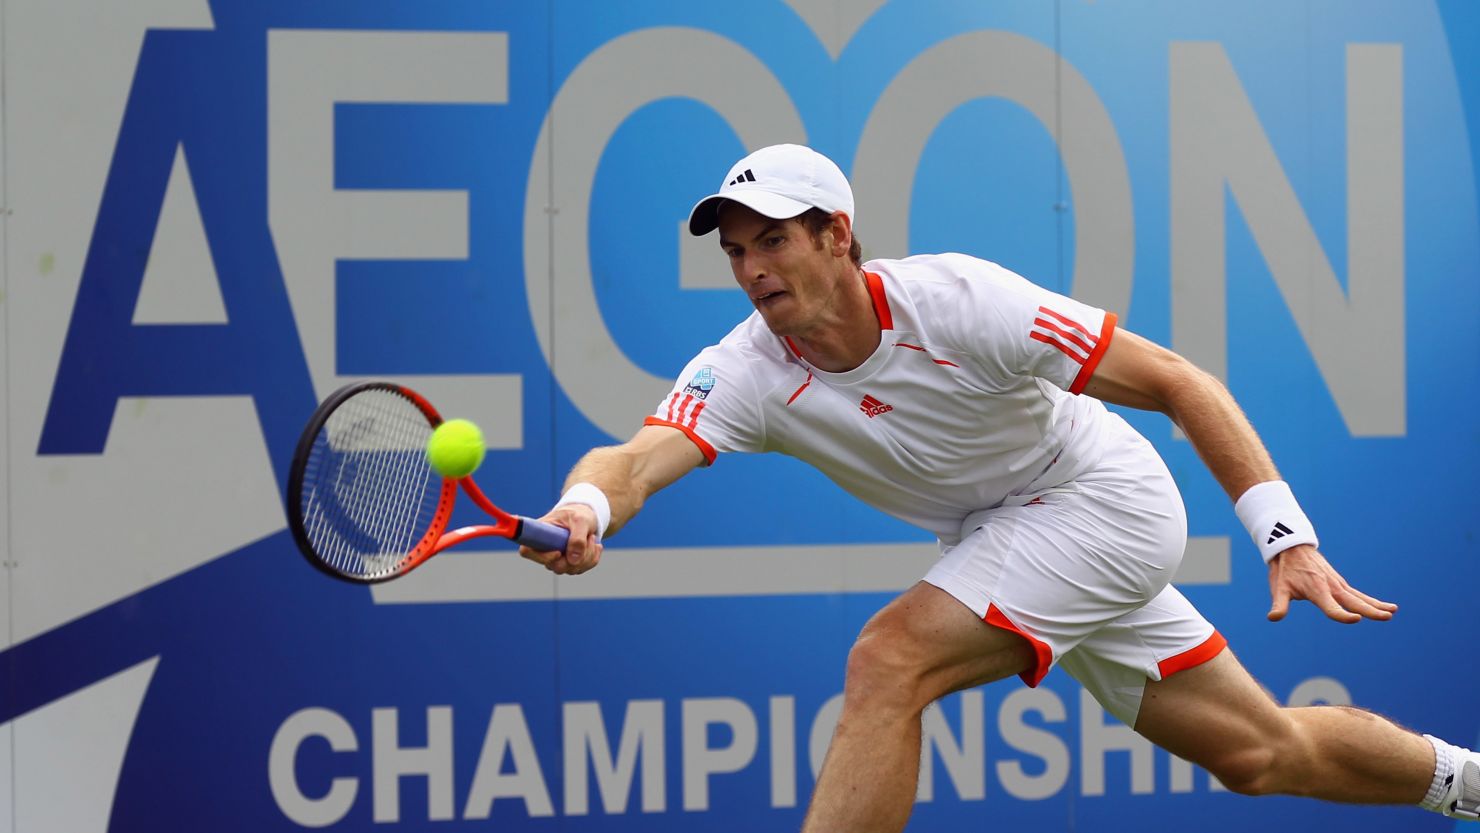 Andy Murray stretches for a forehand during his defeat at the hands of Nicolas Mahut 